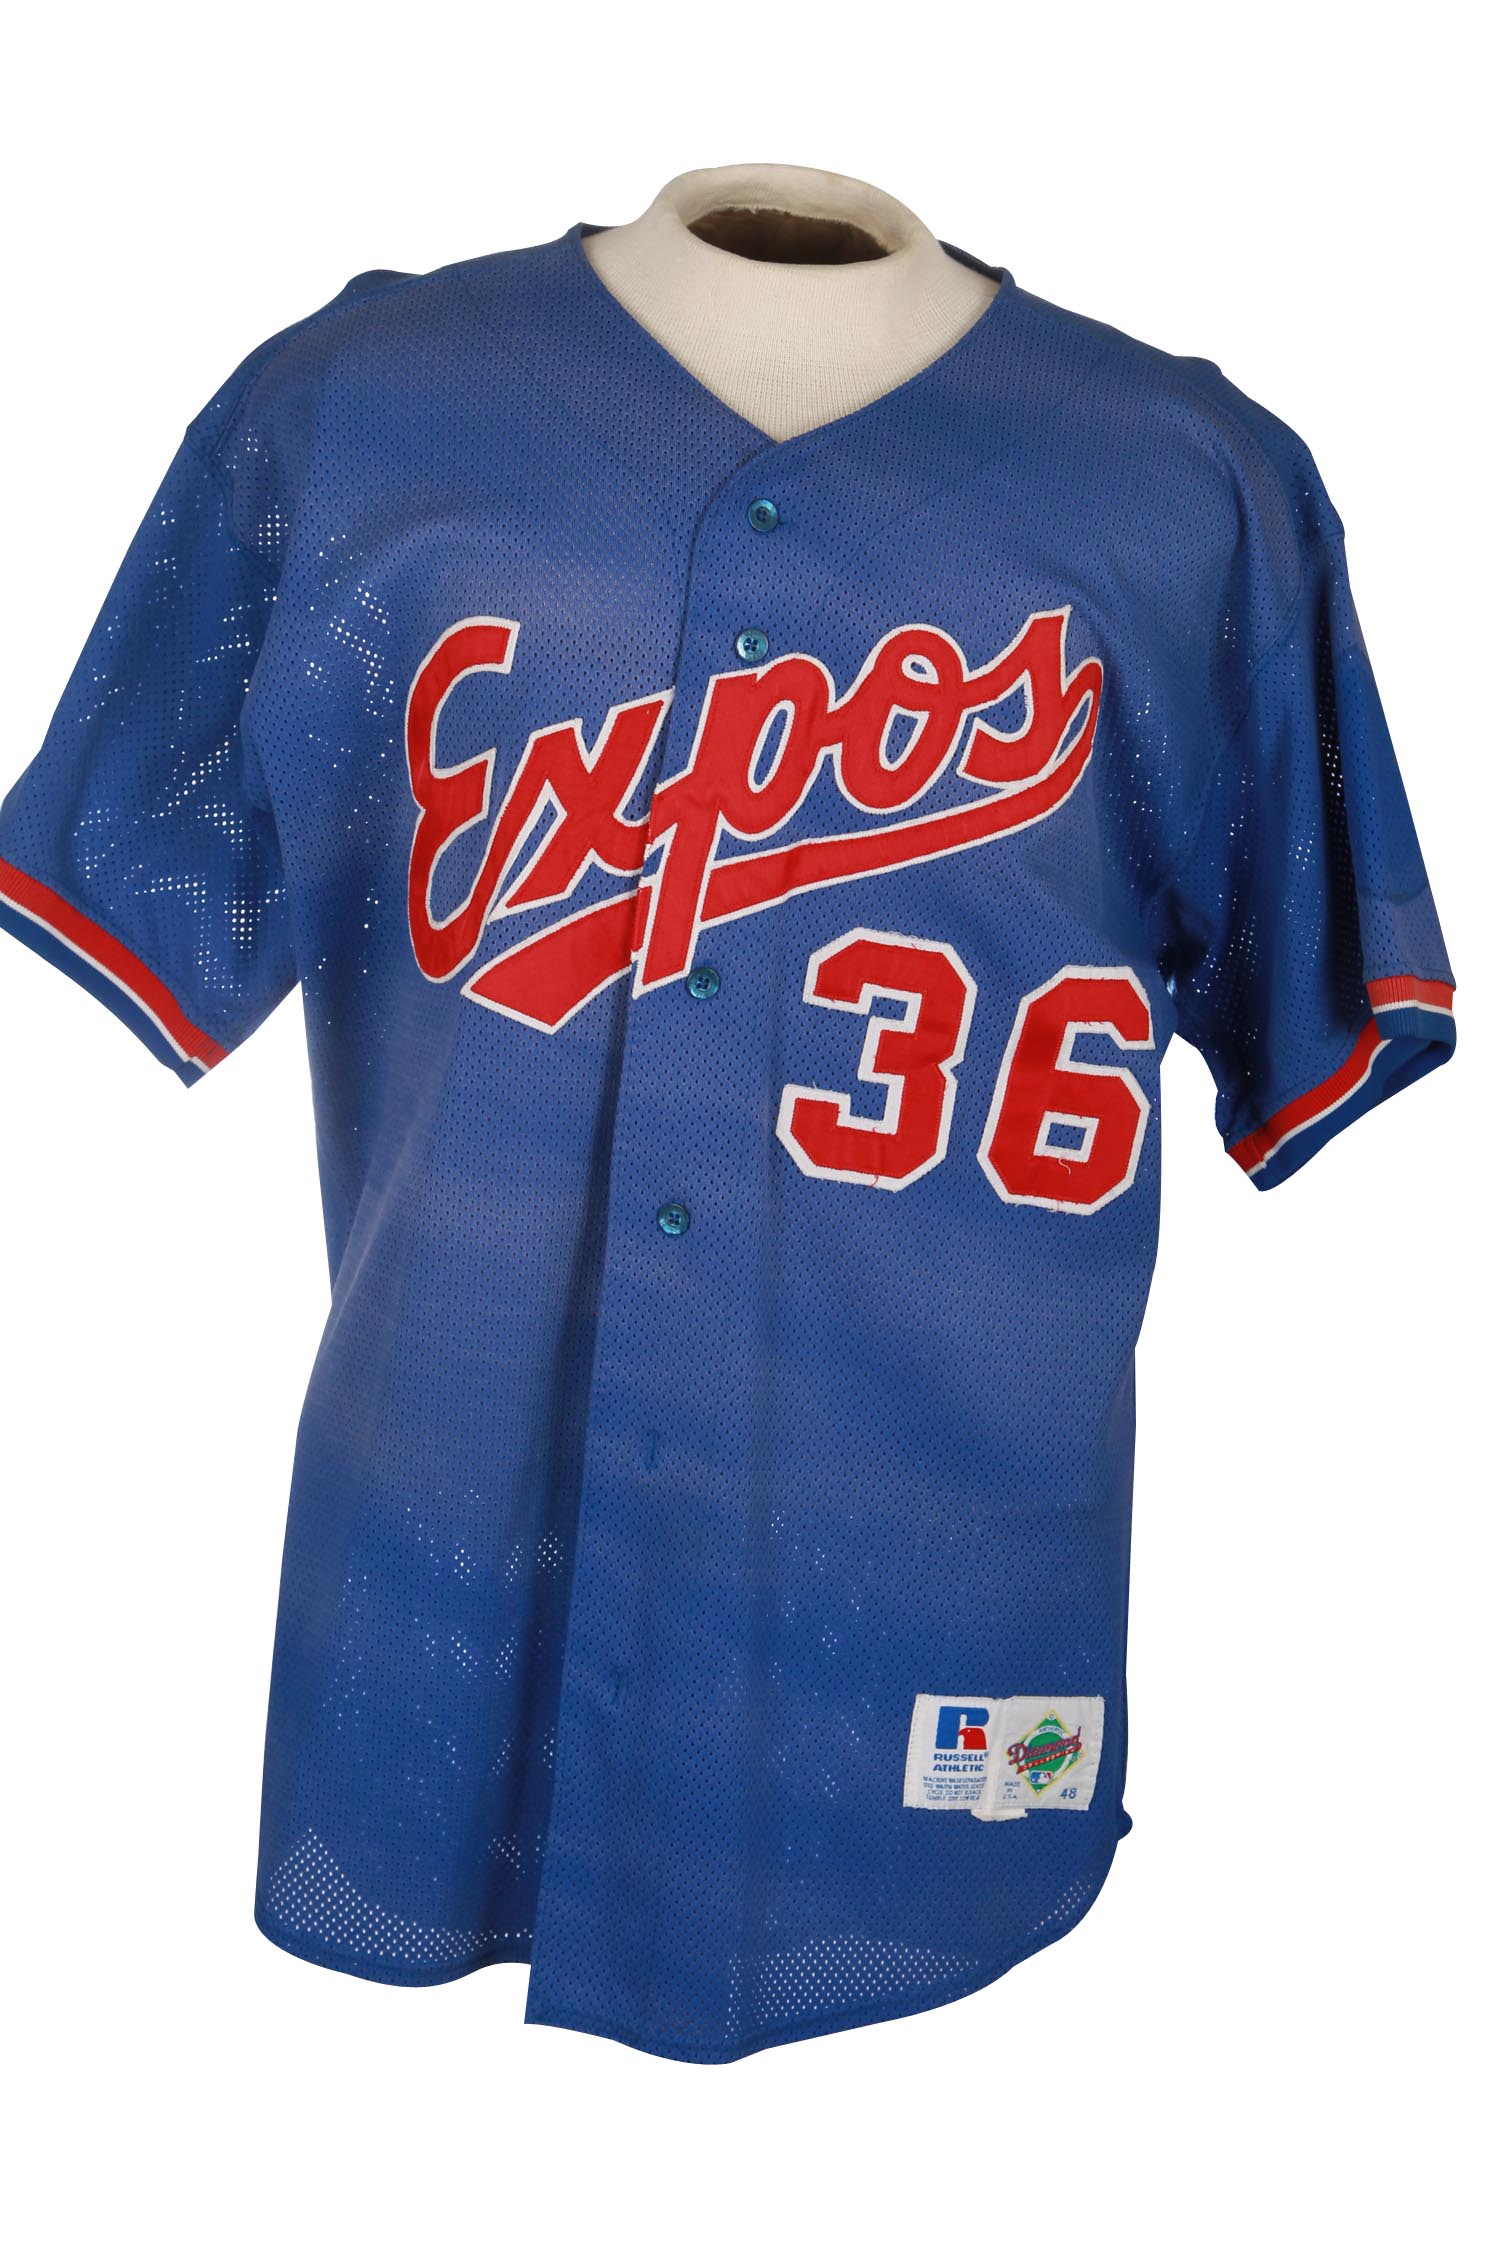 Vladimir Guerrero Autographed Game Used 1996 West Palm Beach Expos #36 Baseball Jersey